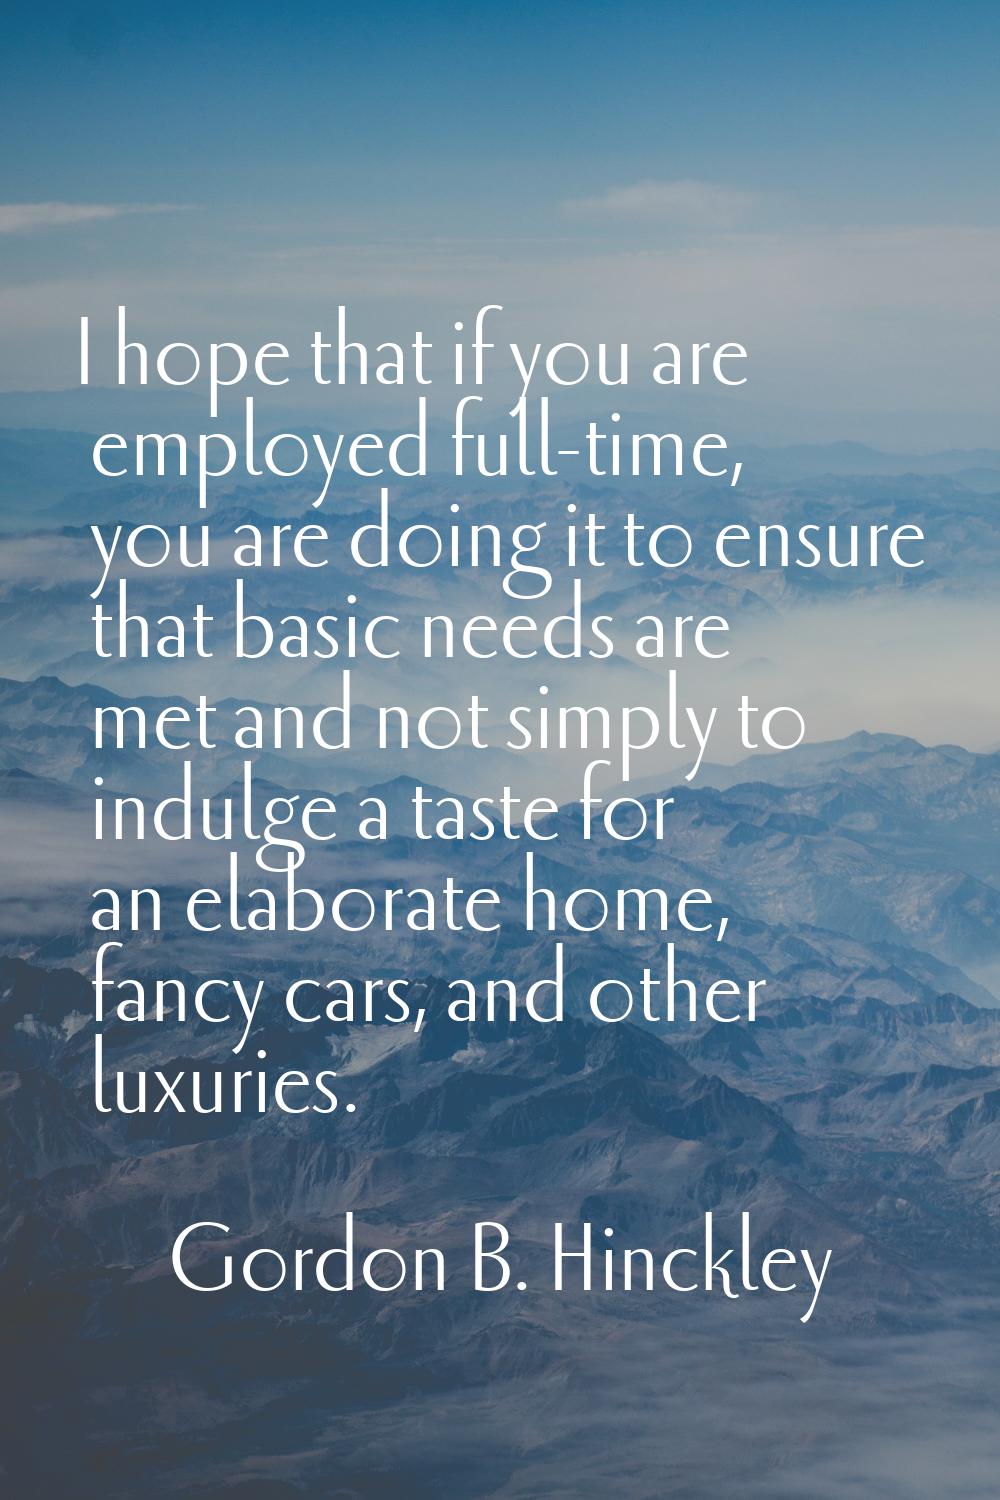 I hope that if you are employed full-time, you are doing it to ensure that basic needs are met and 